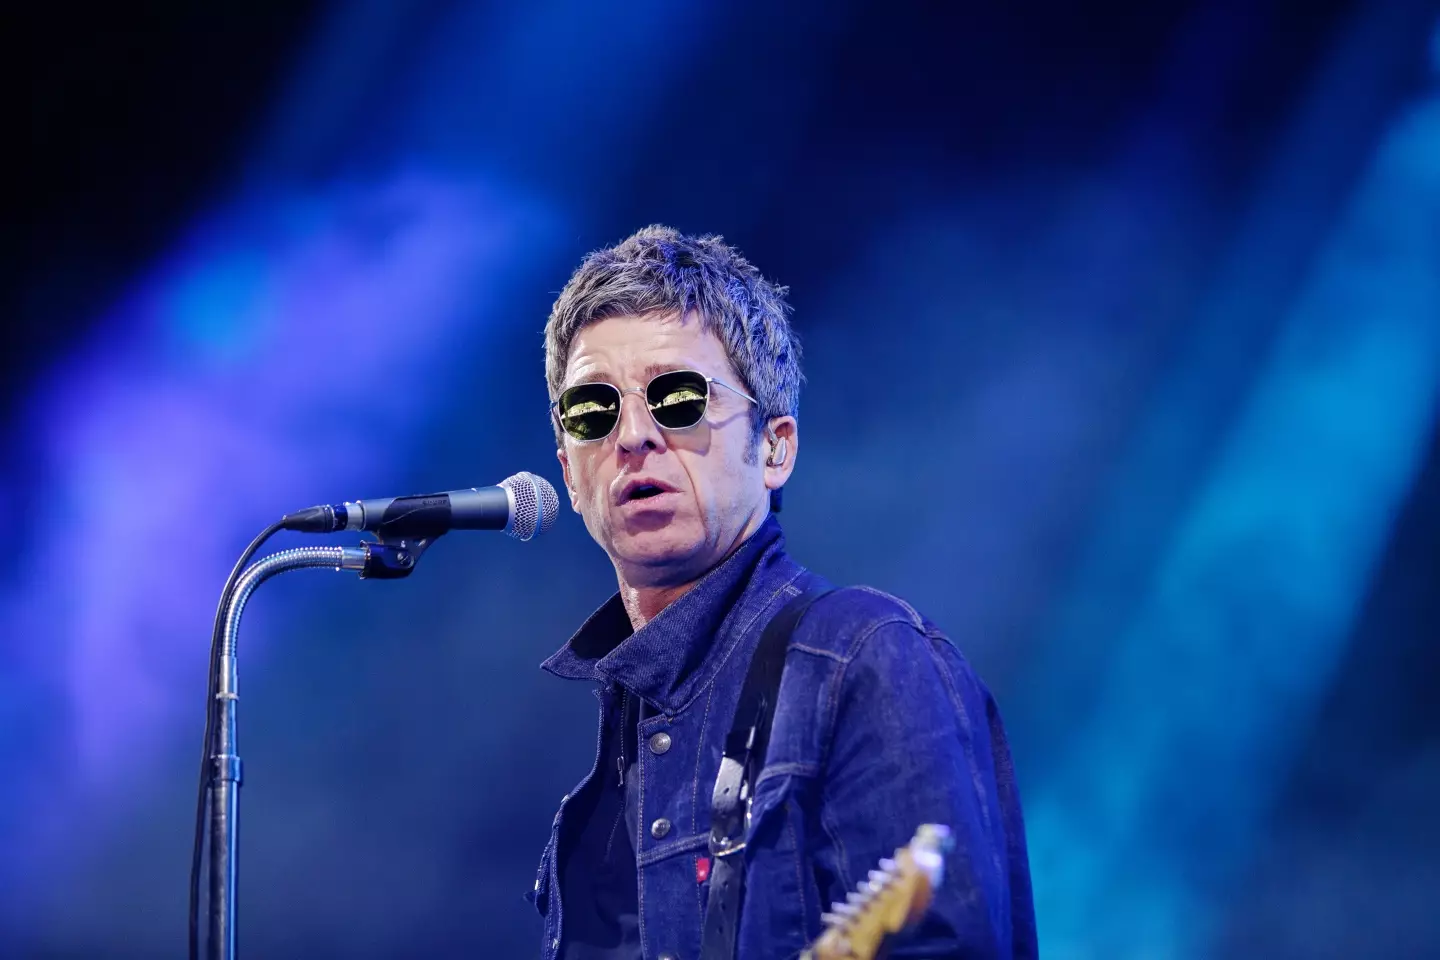 Noel Gallagher is being ordered to pay £1,000 for speeding despite never passing his driving test.